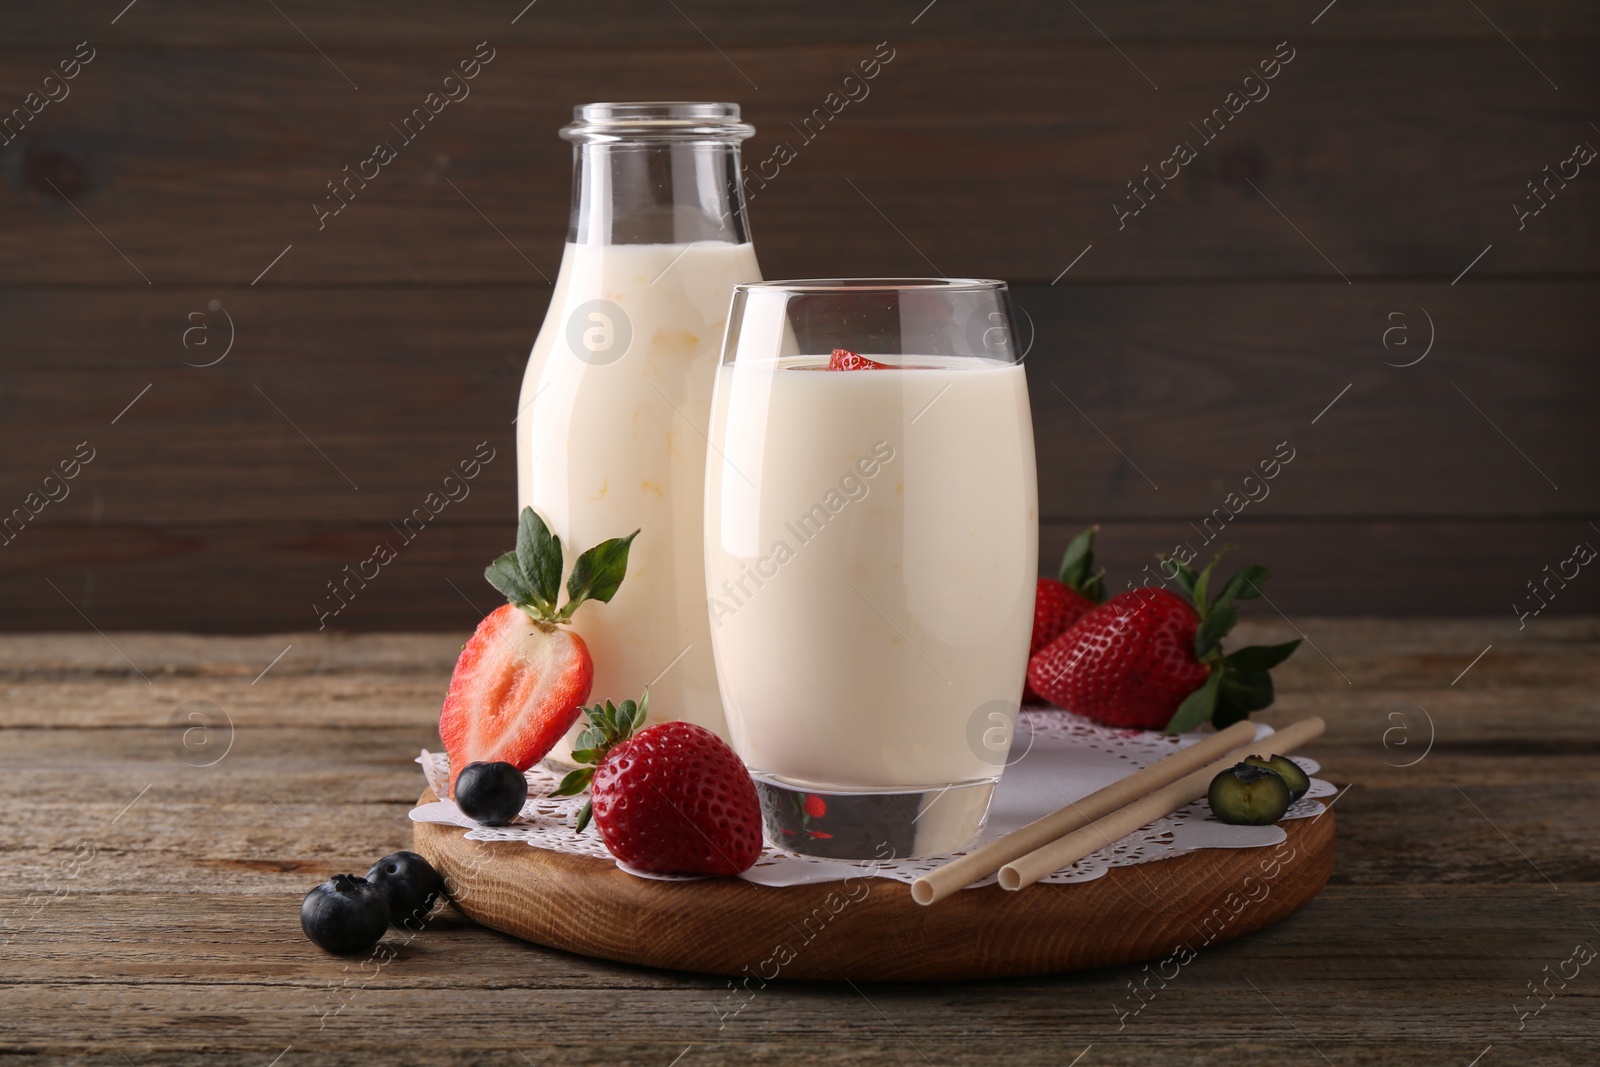 Photo of Tasty yogurt in glass, bottle, straws and berries on wooden table